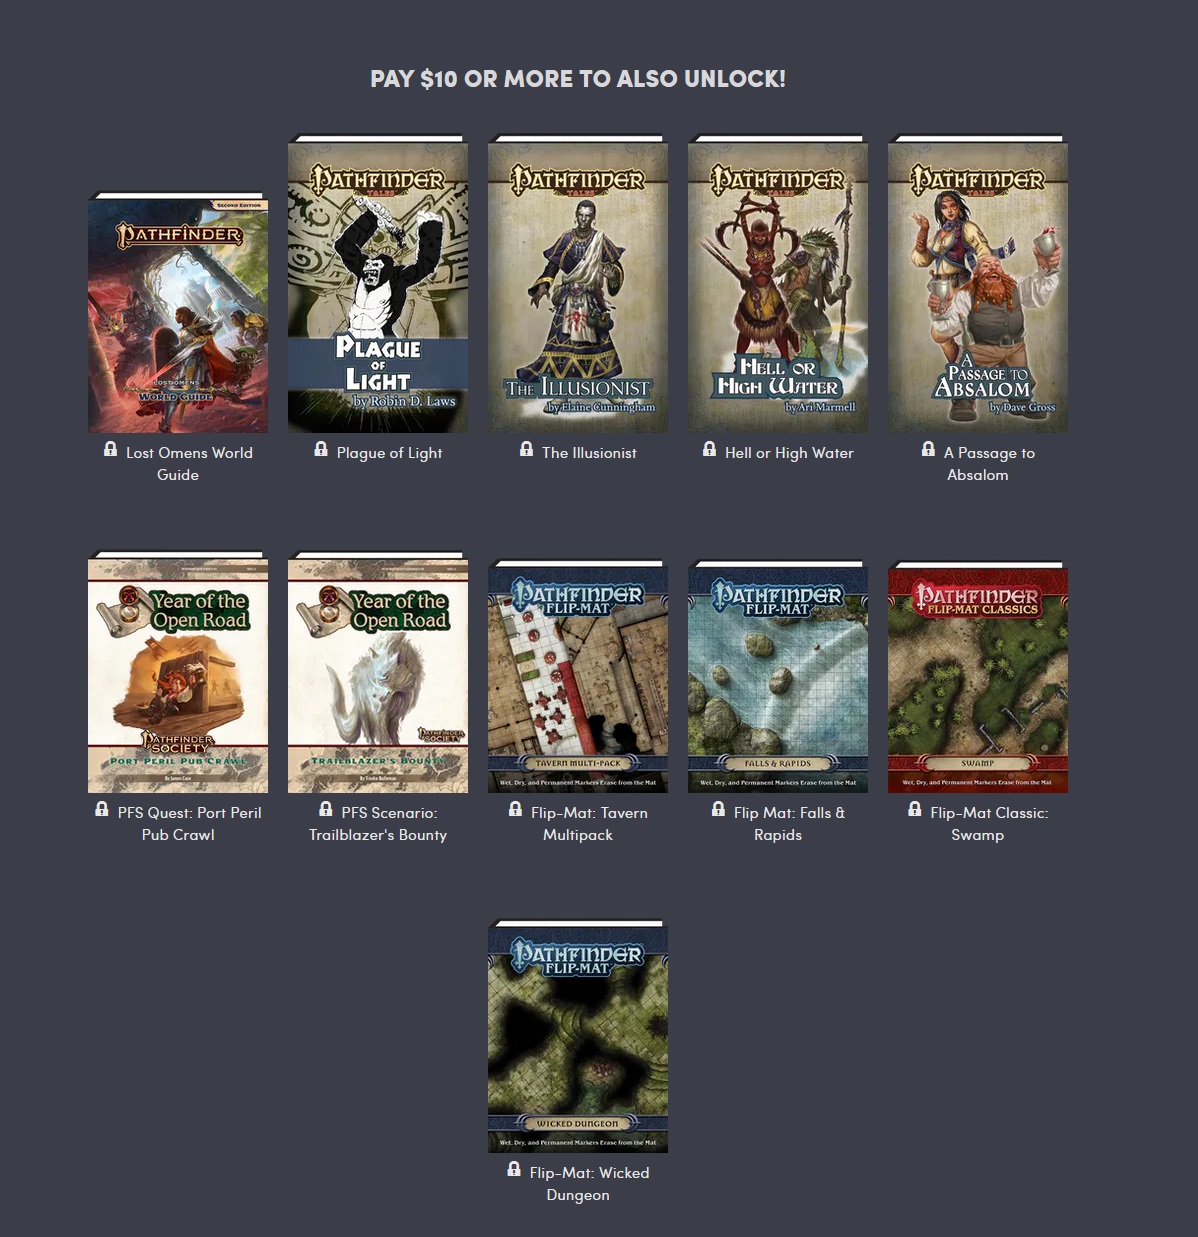 Pathfinder 2 In Humble Bundle Dedicated To Diversity - Bell of Lost Souls